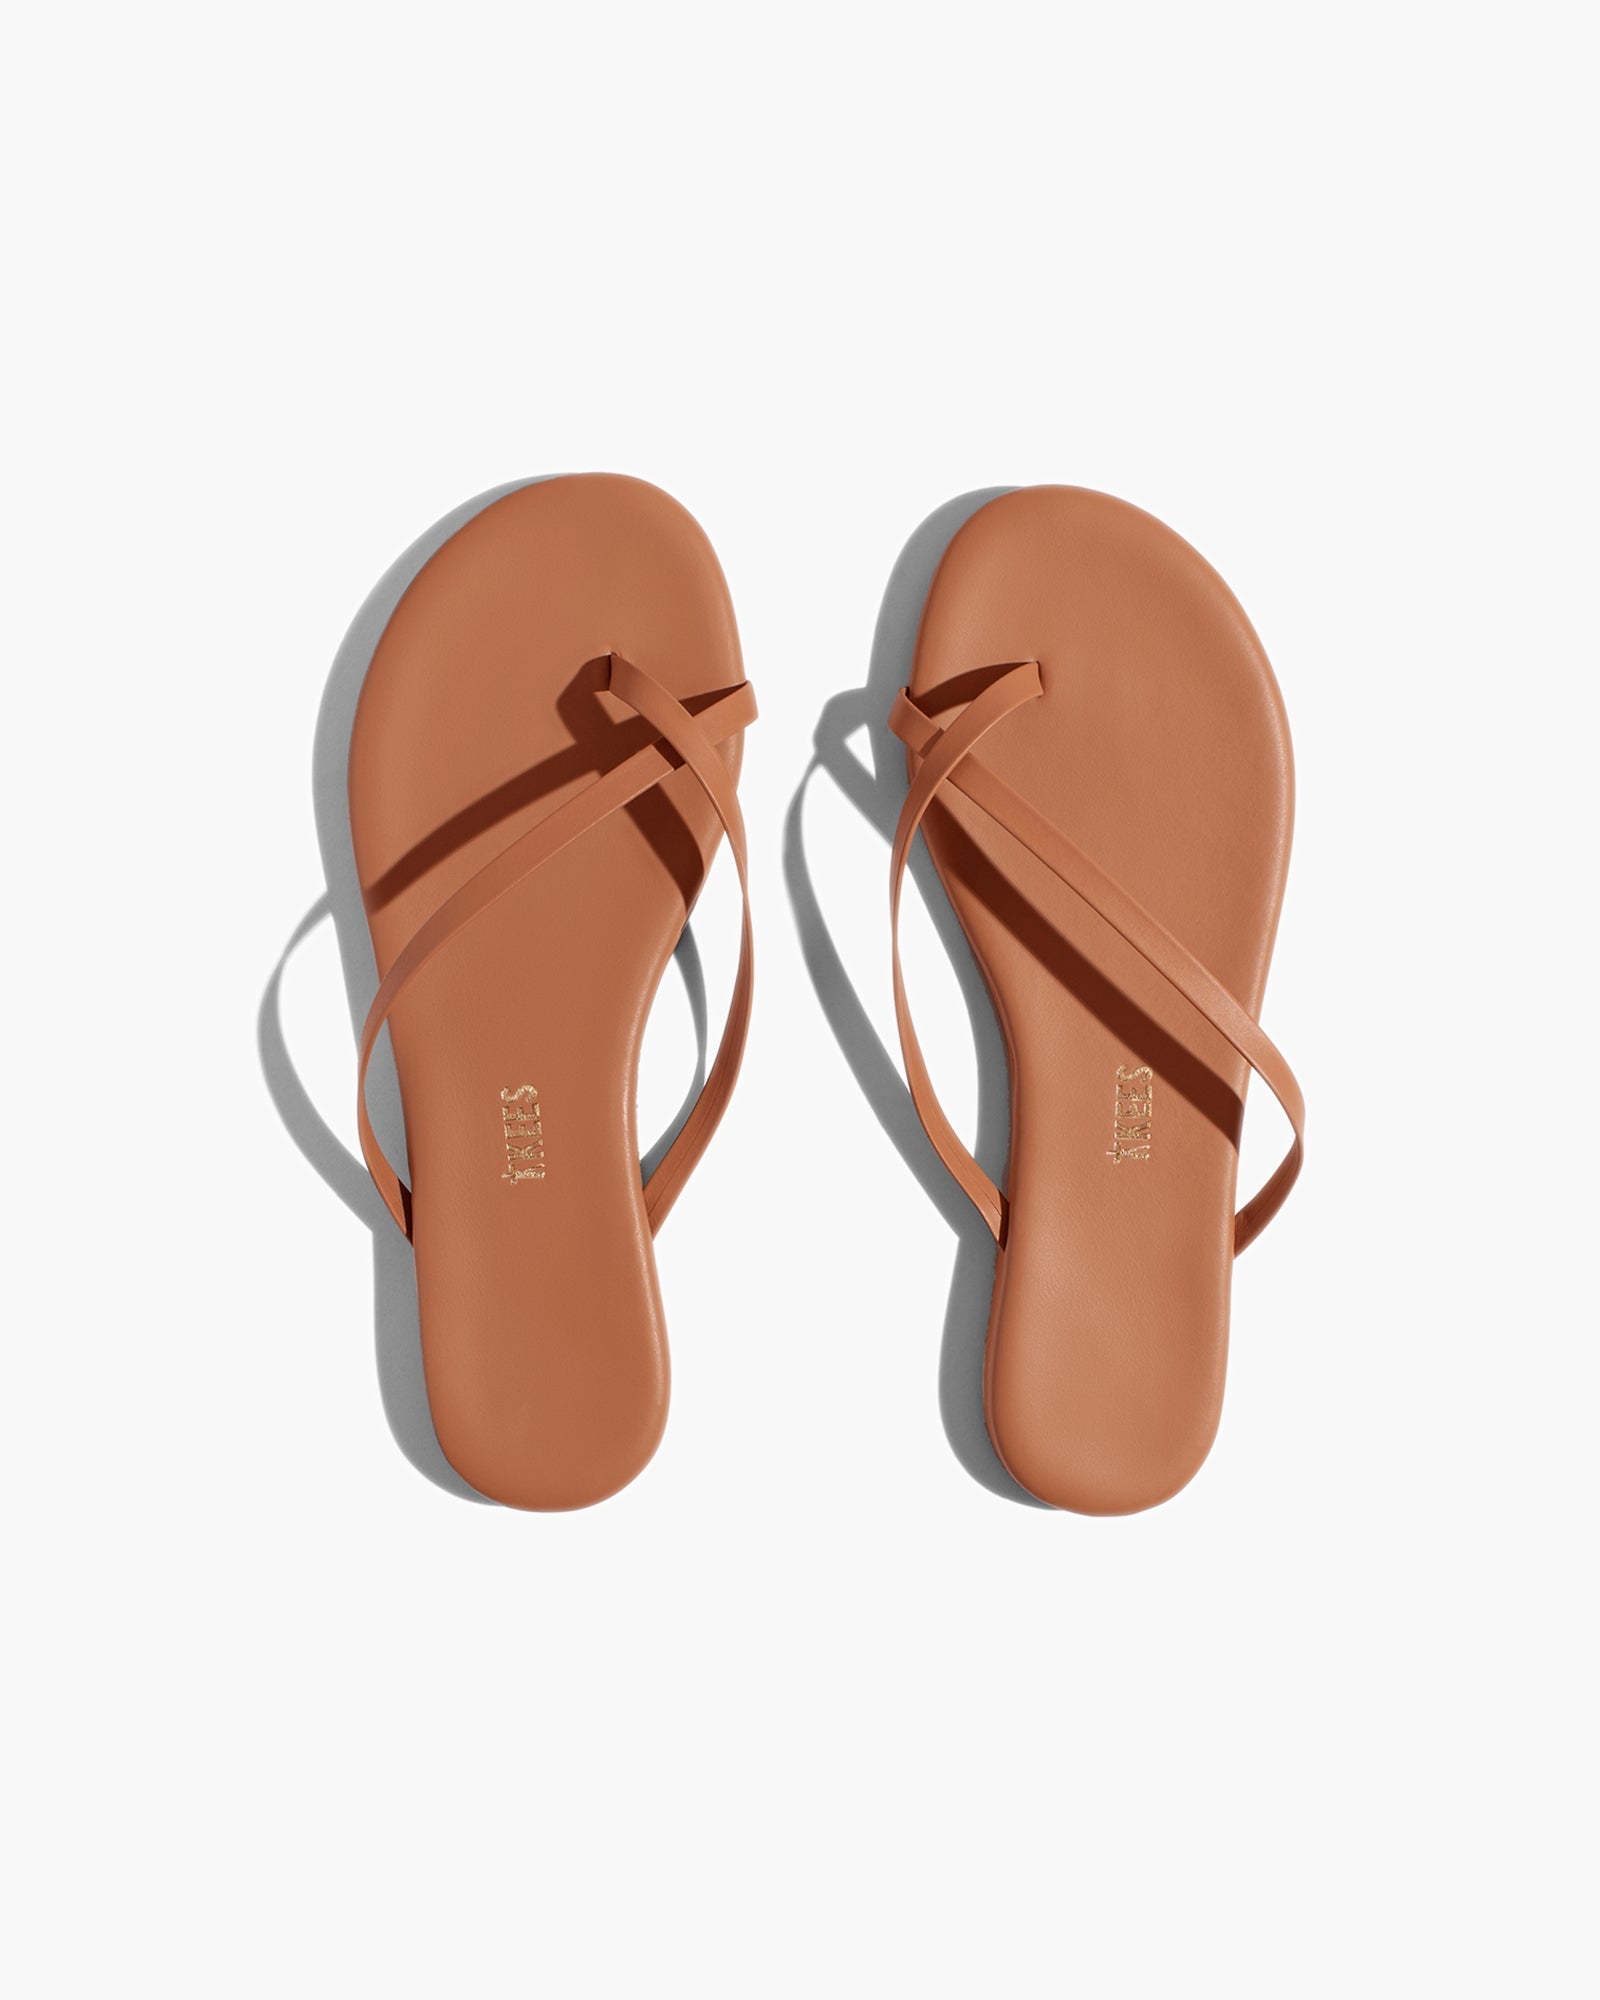 Rose Gold Women's's's's's's's's's's's's's's's's's's's's's's TKEES Riley Sandals | ESWRNQ189